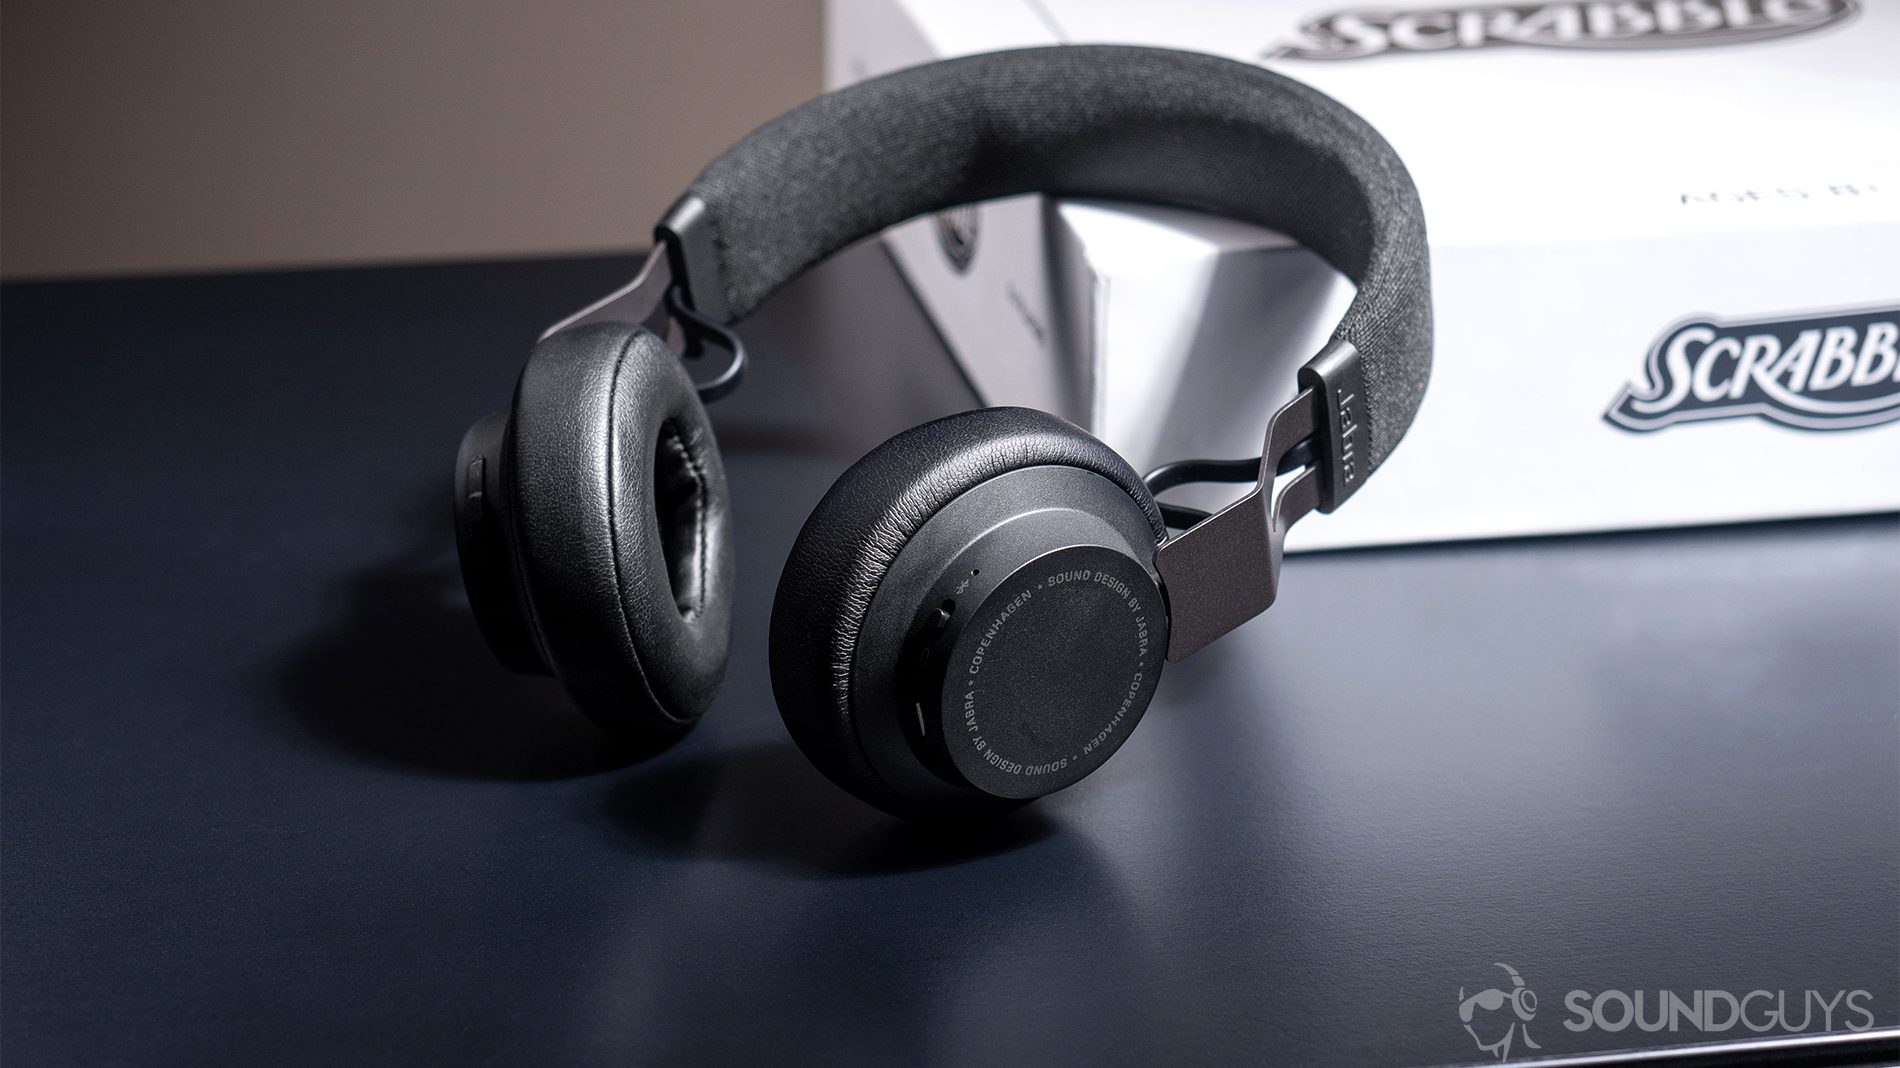 Jabra Move Wireless: The headphones propped up against a white Scrabble box.